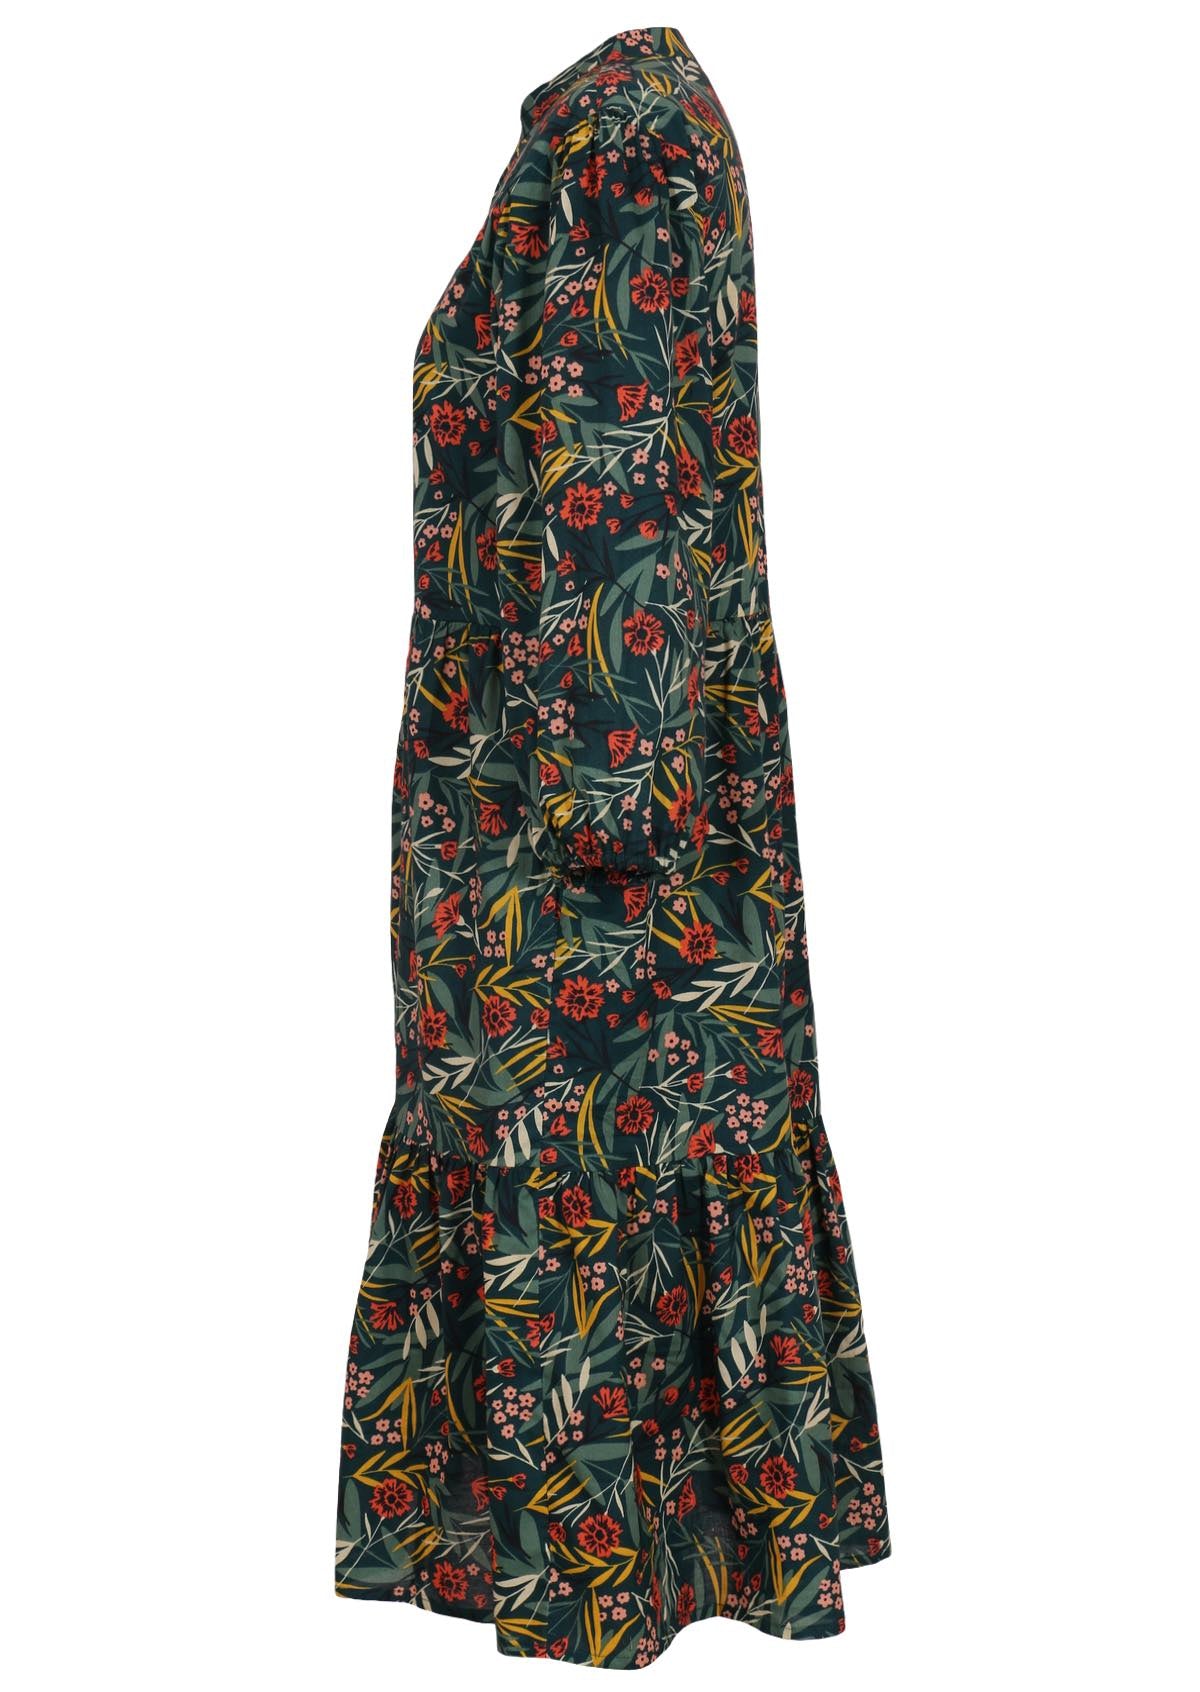 Green base floral print cotton dress with two tiered skirt